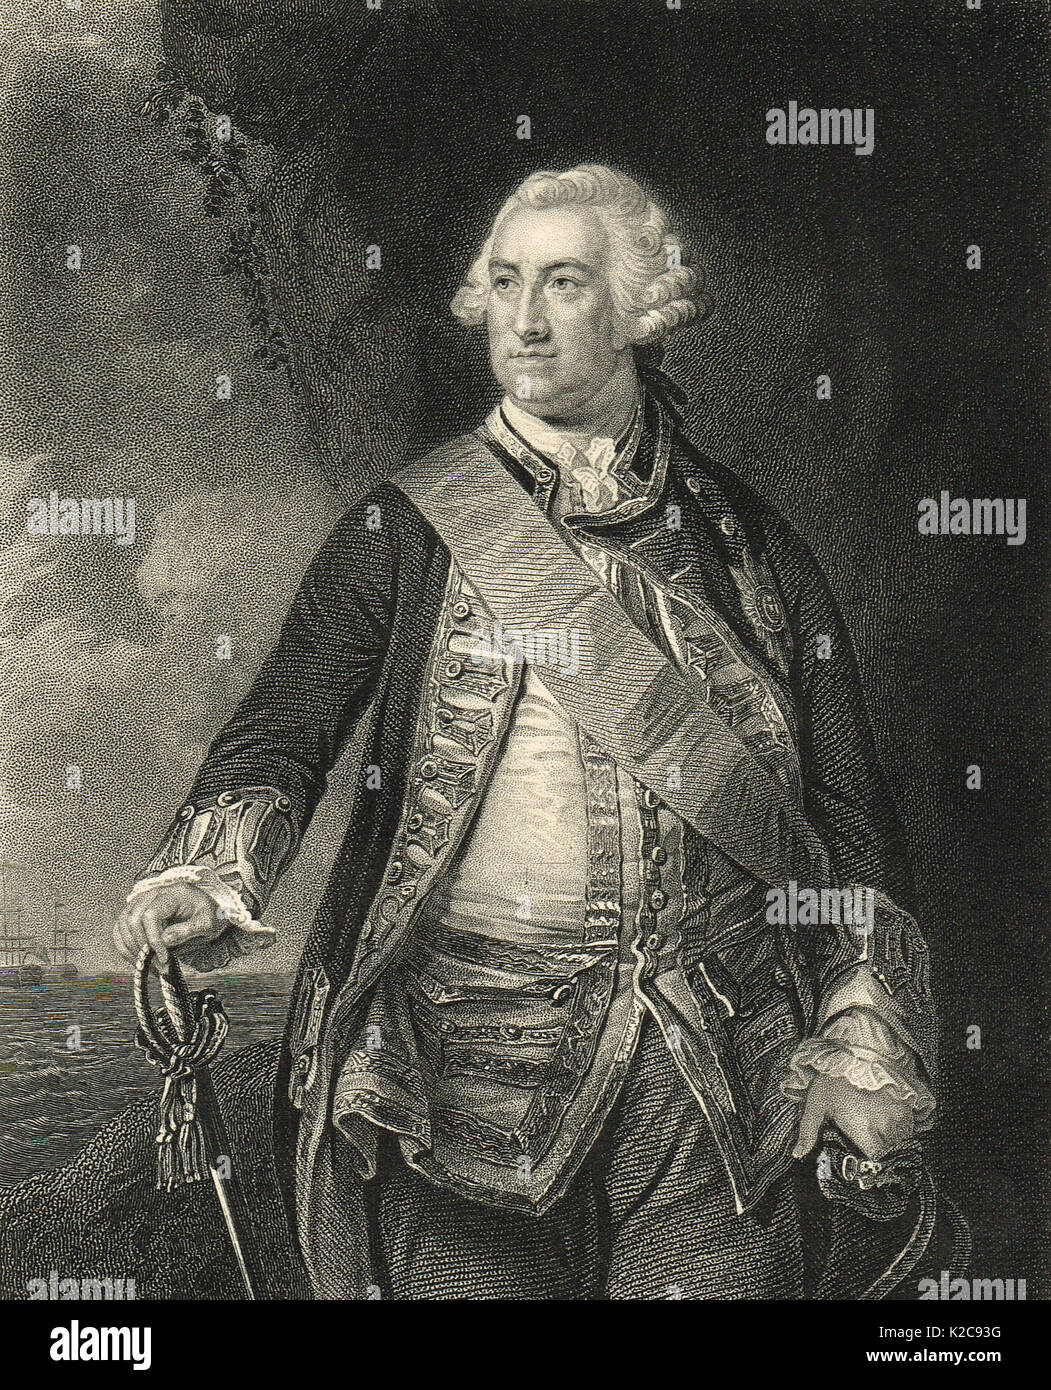 L'amiral Lord Edward Hawke, 1705-1781 Banque D'Images